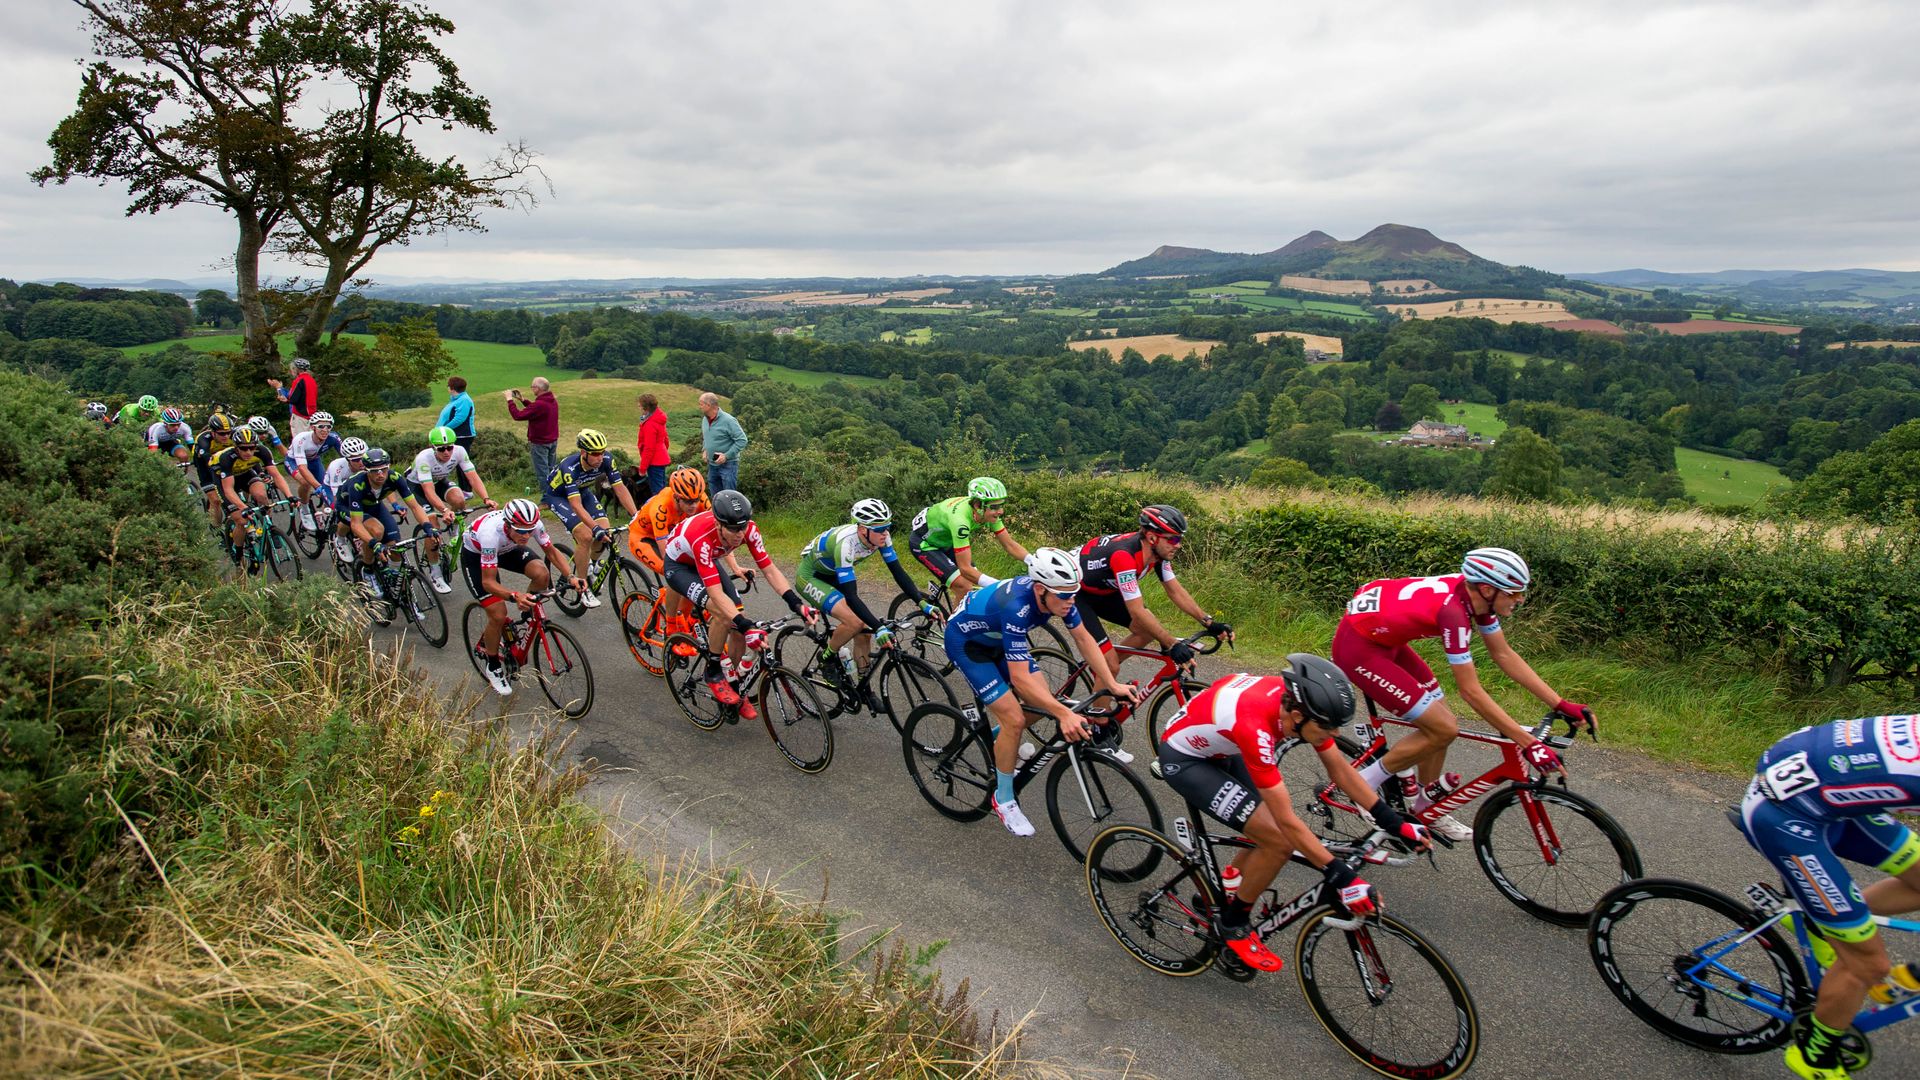 2020 Tour of Britain cancelled